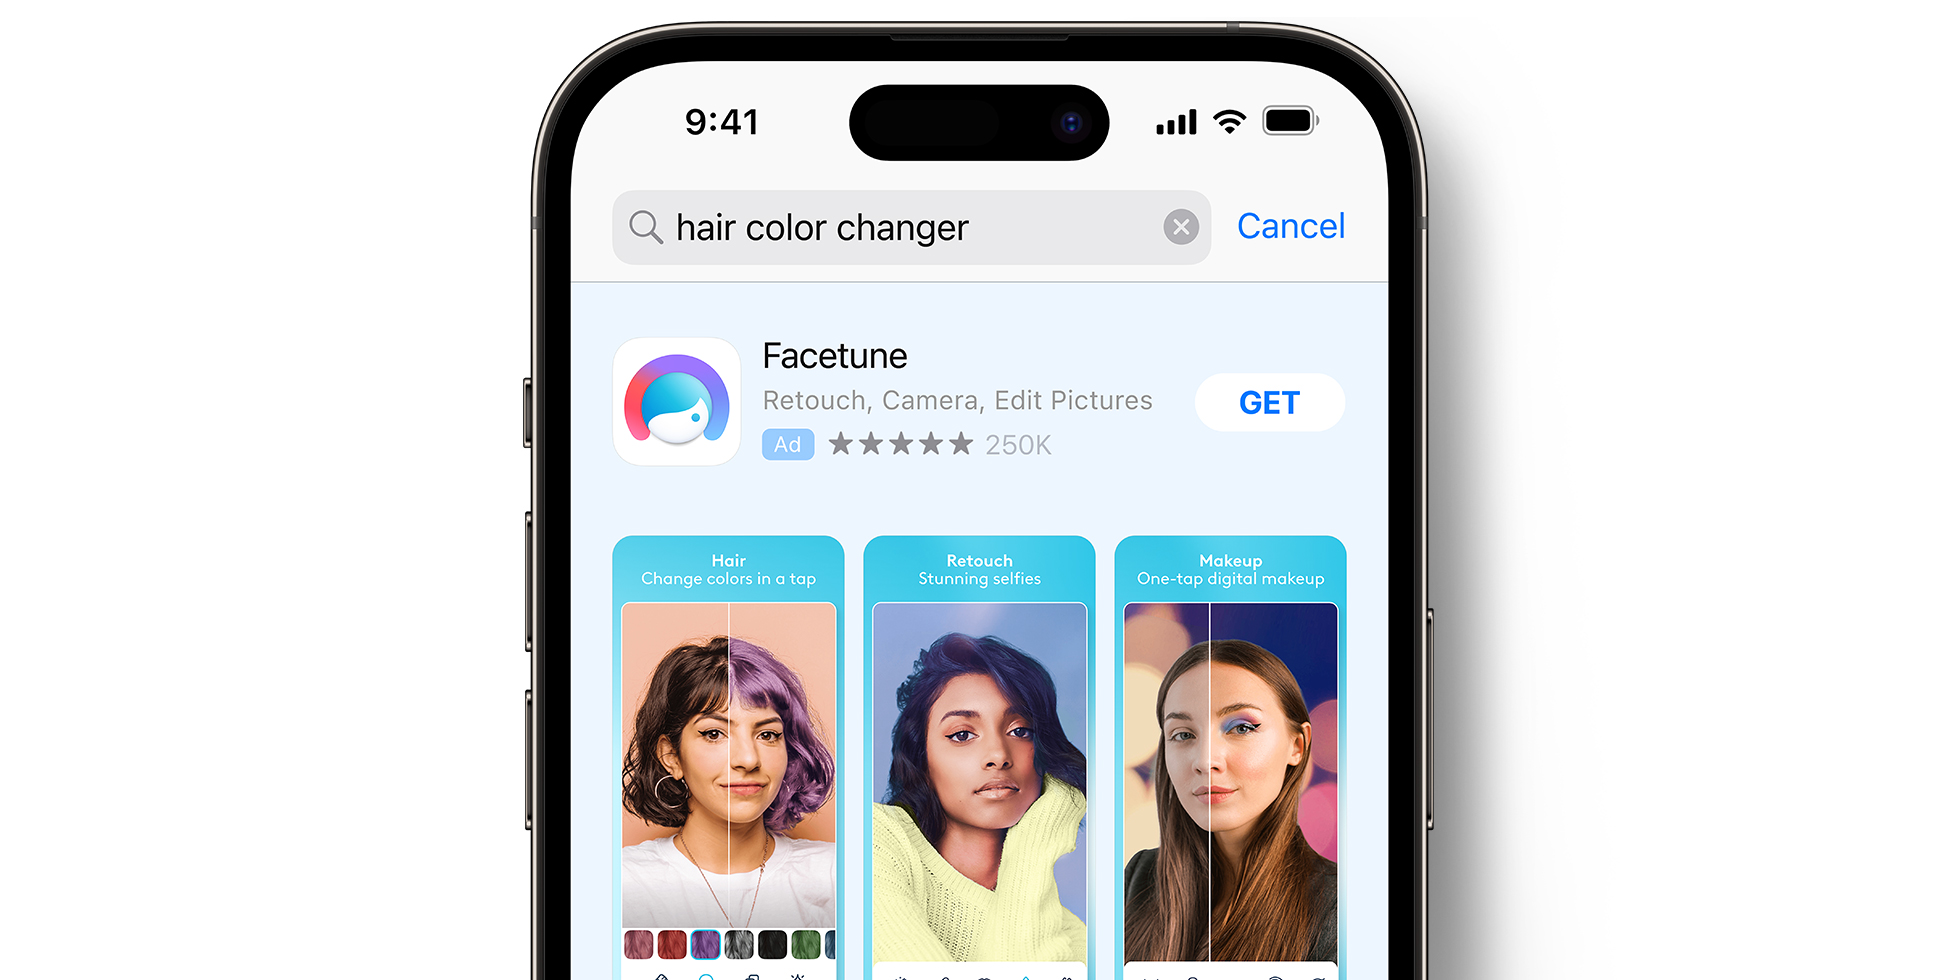 Facetune ad on the App Store